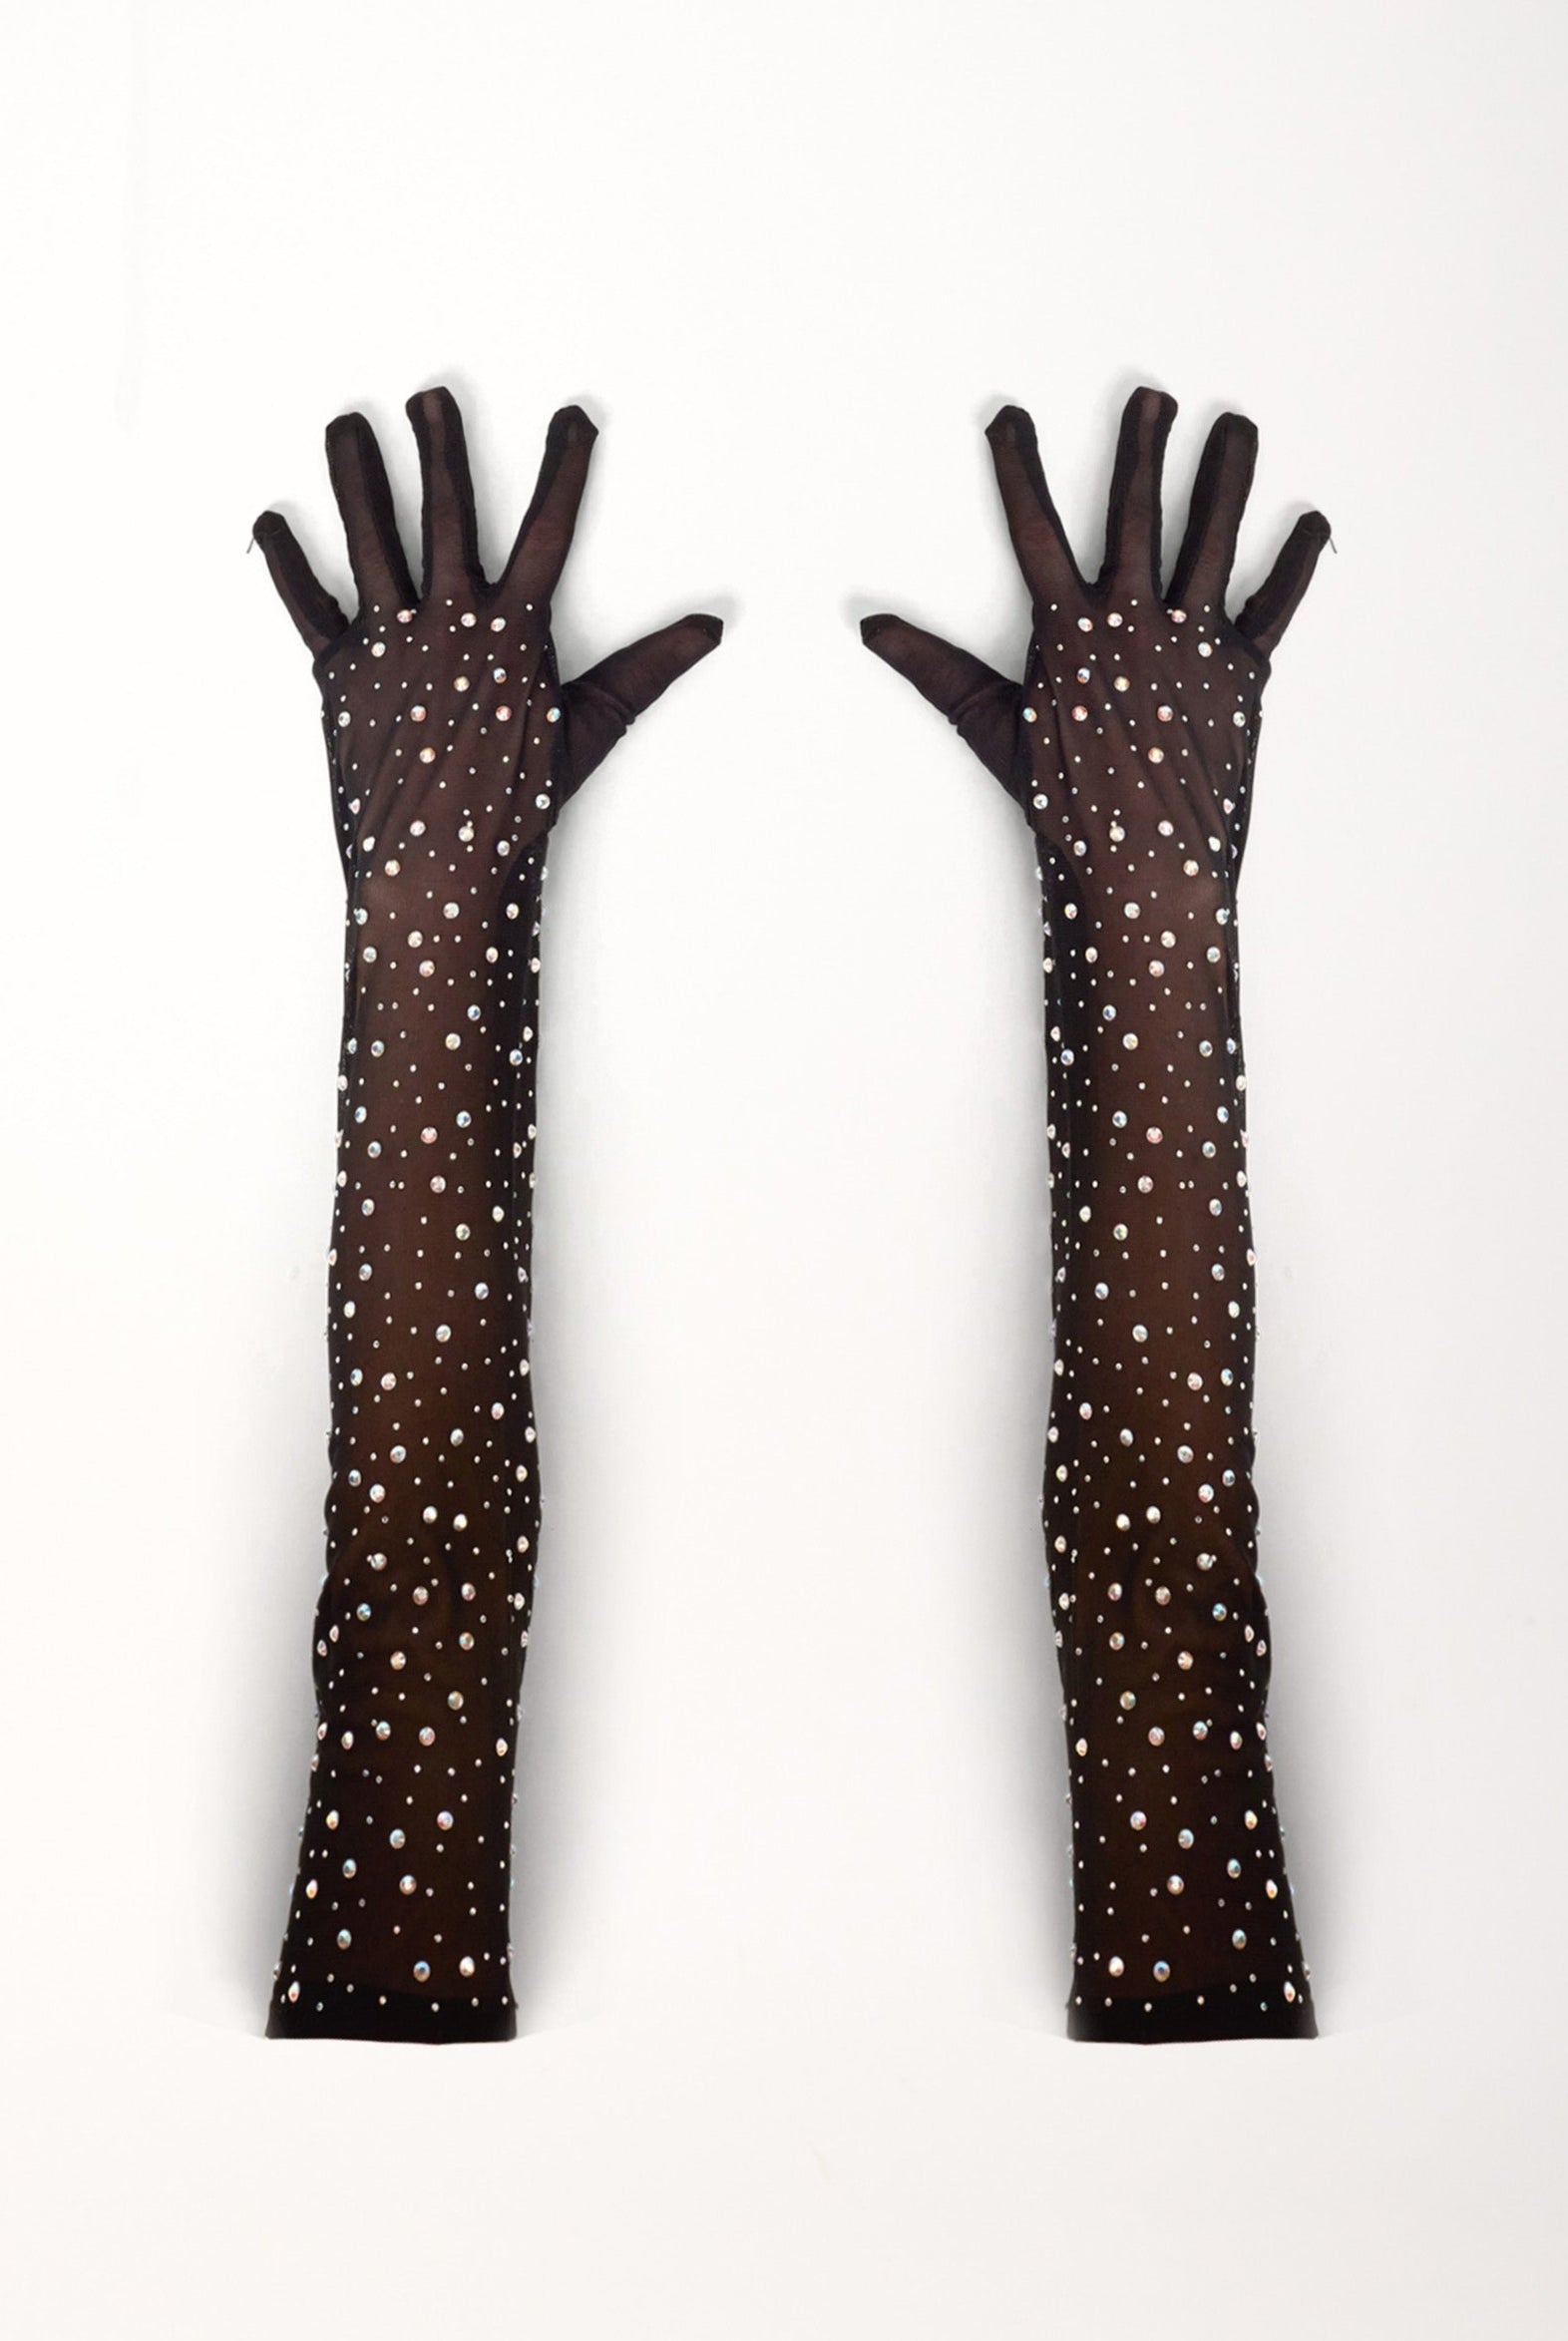 Over the Elbow Mesh Rhinestone Gloves in Black | gloves | party | occasion | festival | event | new years | new year | Christmas | present | Costume | halloween | Diamante | rhinestone | Embellished | glam | going out | Women's Accessories | accessories | mesh gloves | 